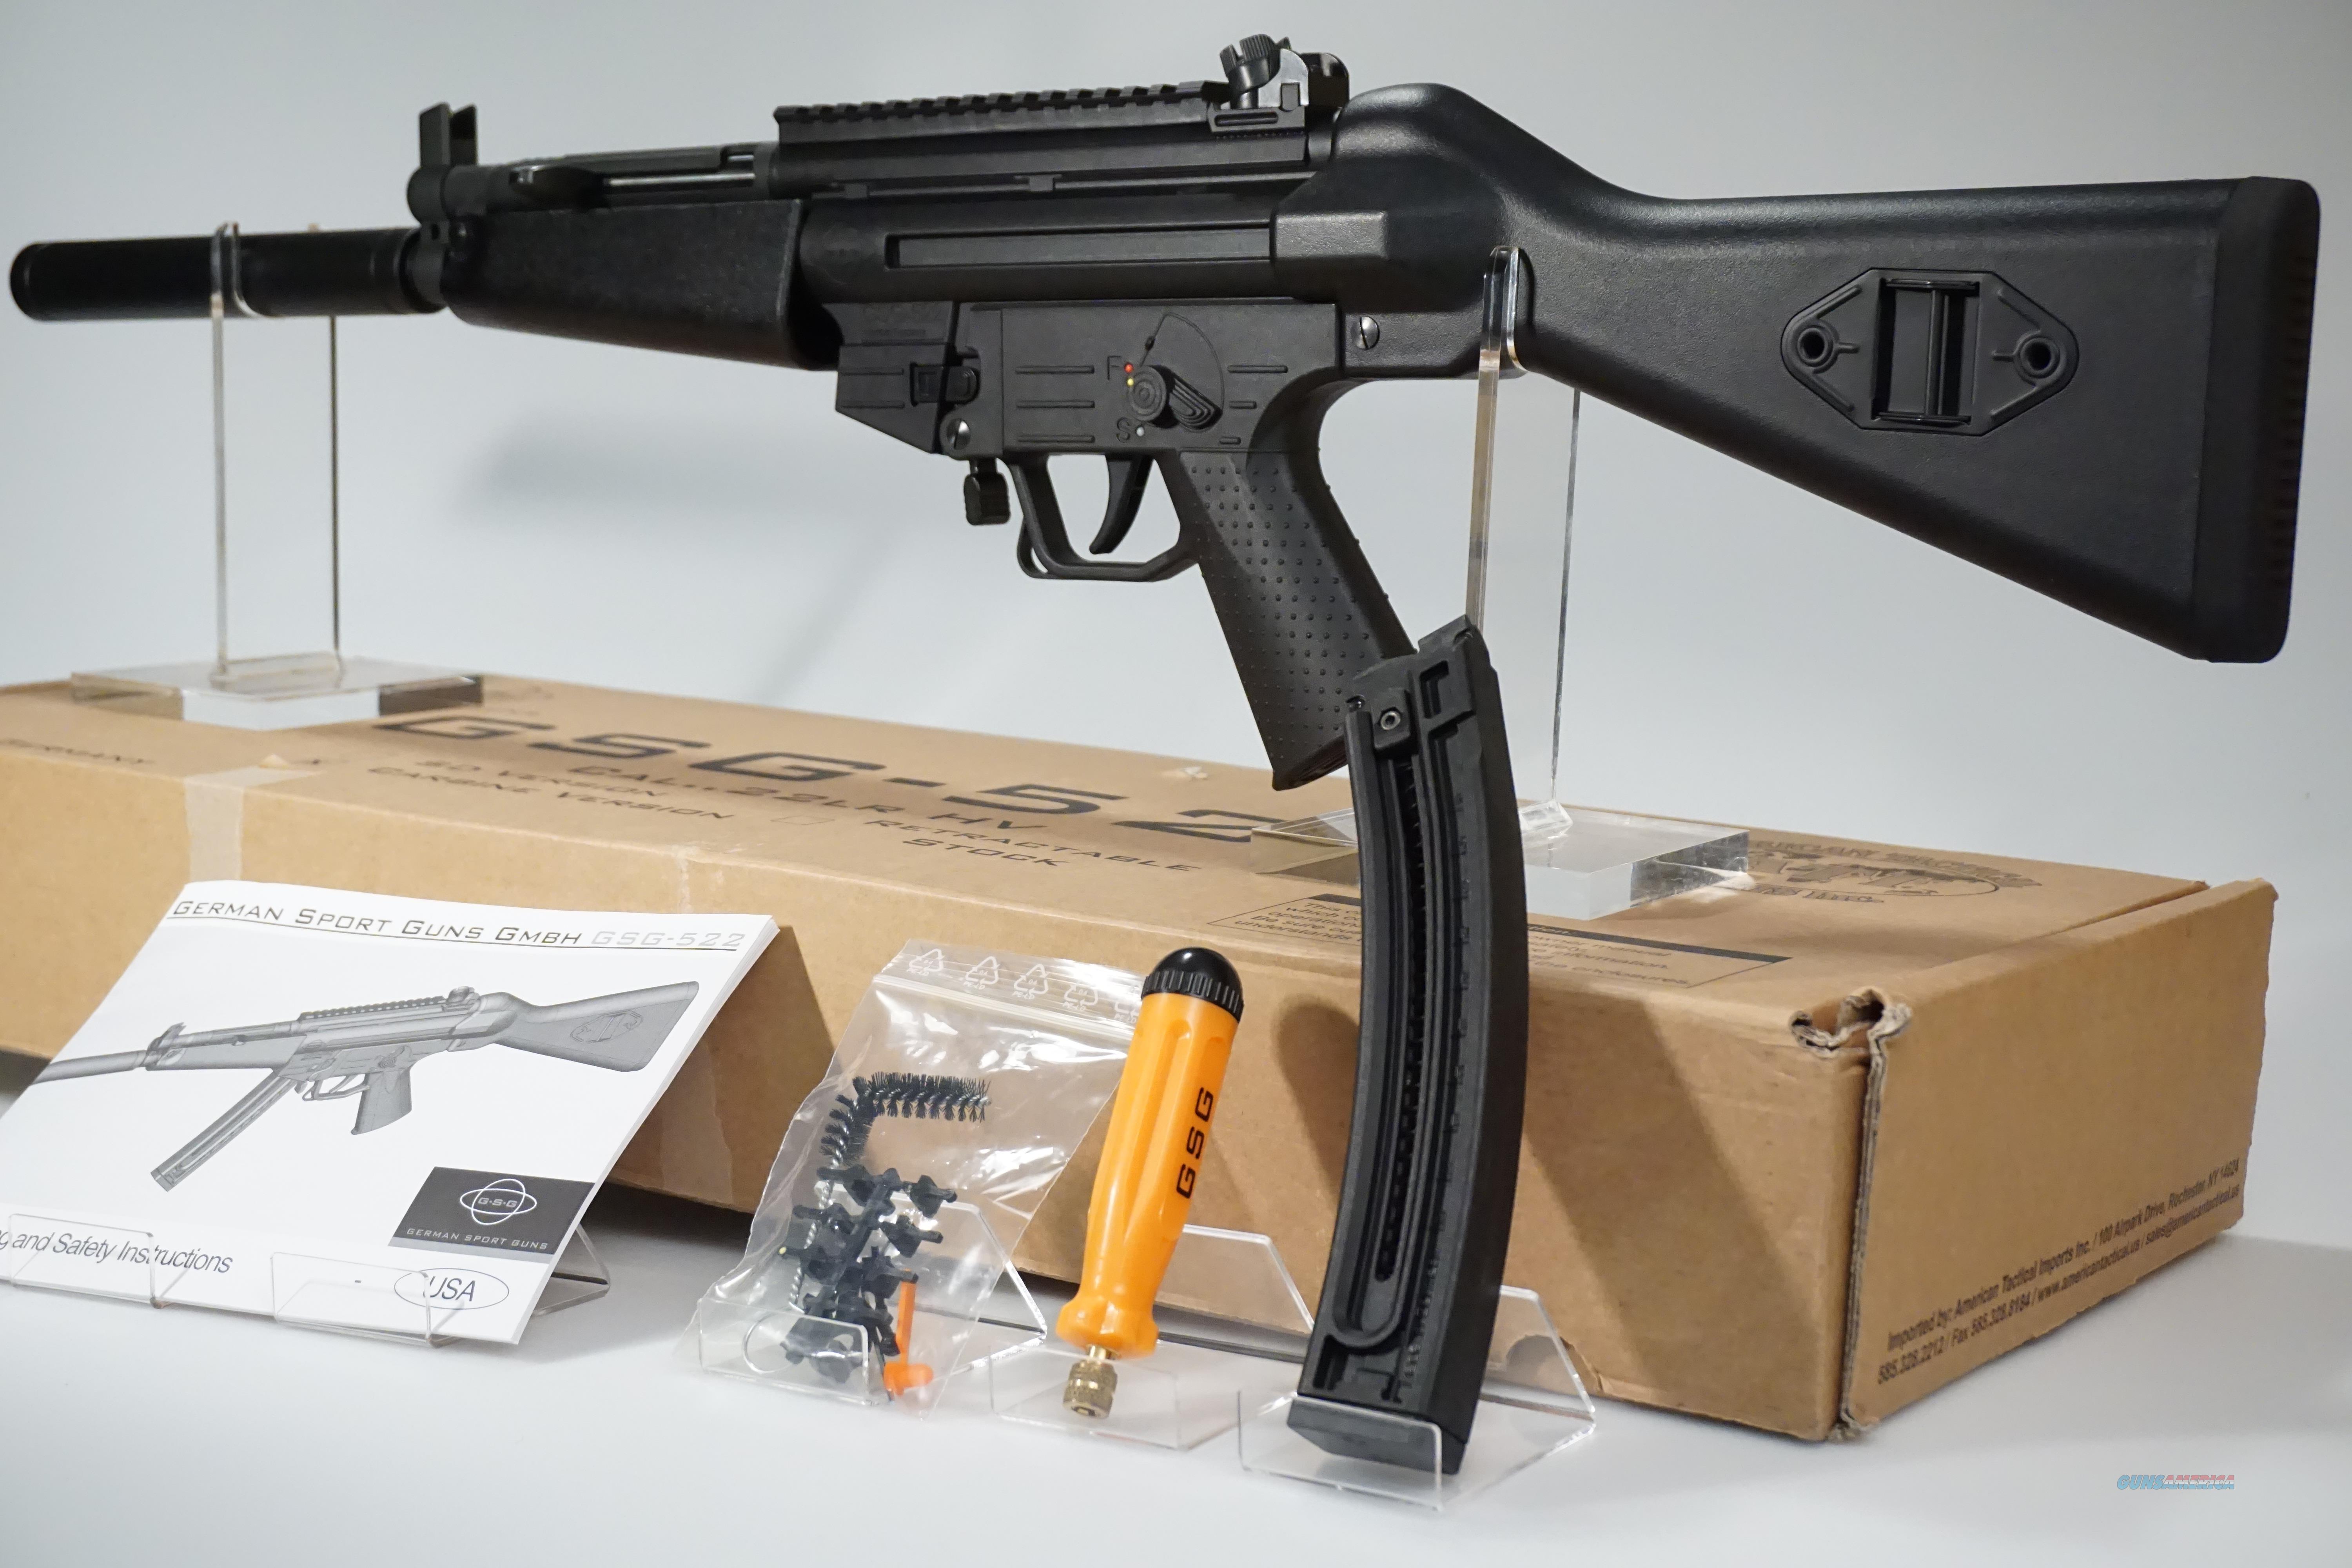 Product Description-The GSG-522 has been built to replicate the MP5. 